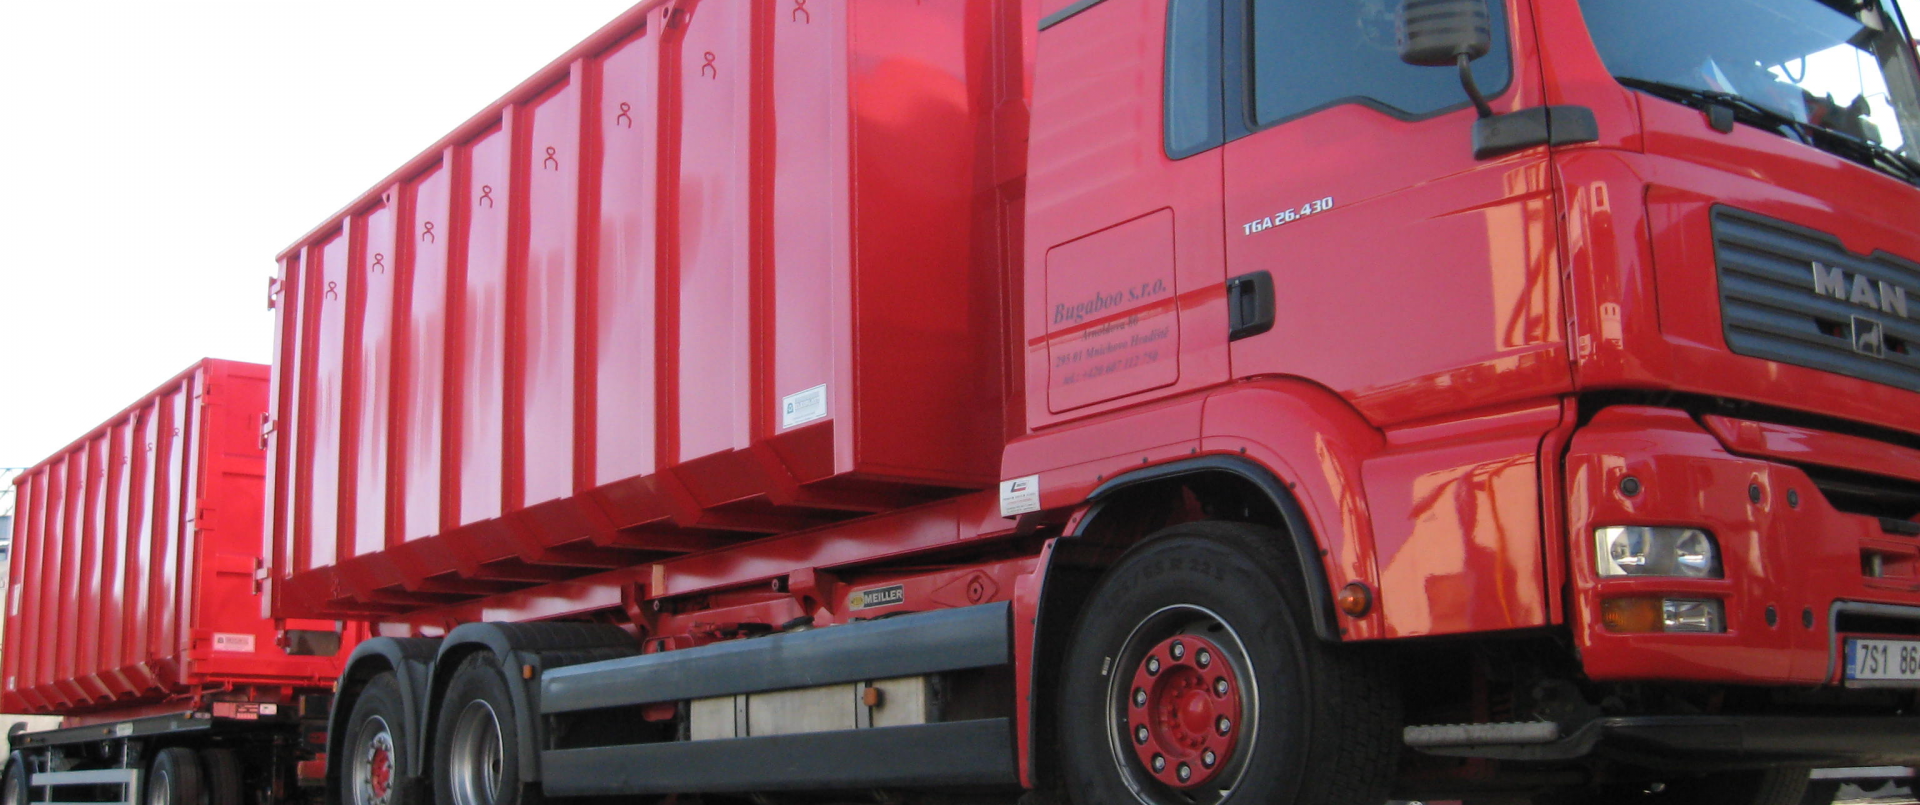 production of roll-off containers in many modifications